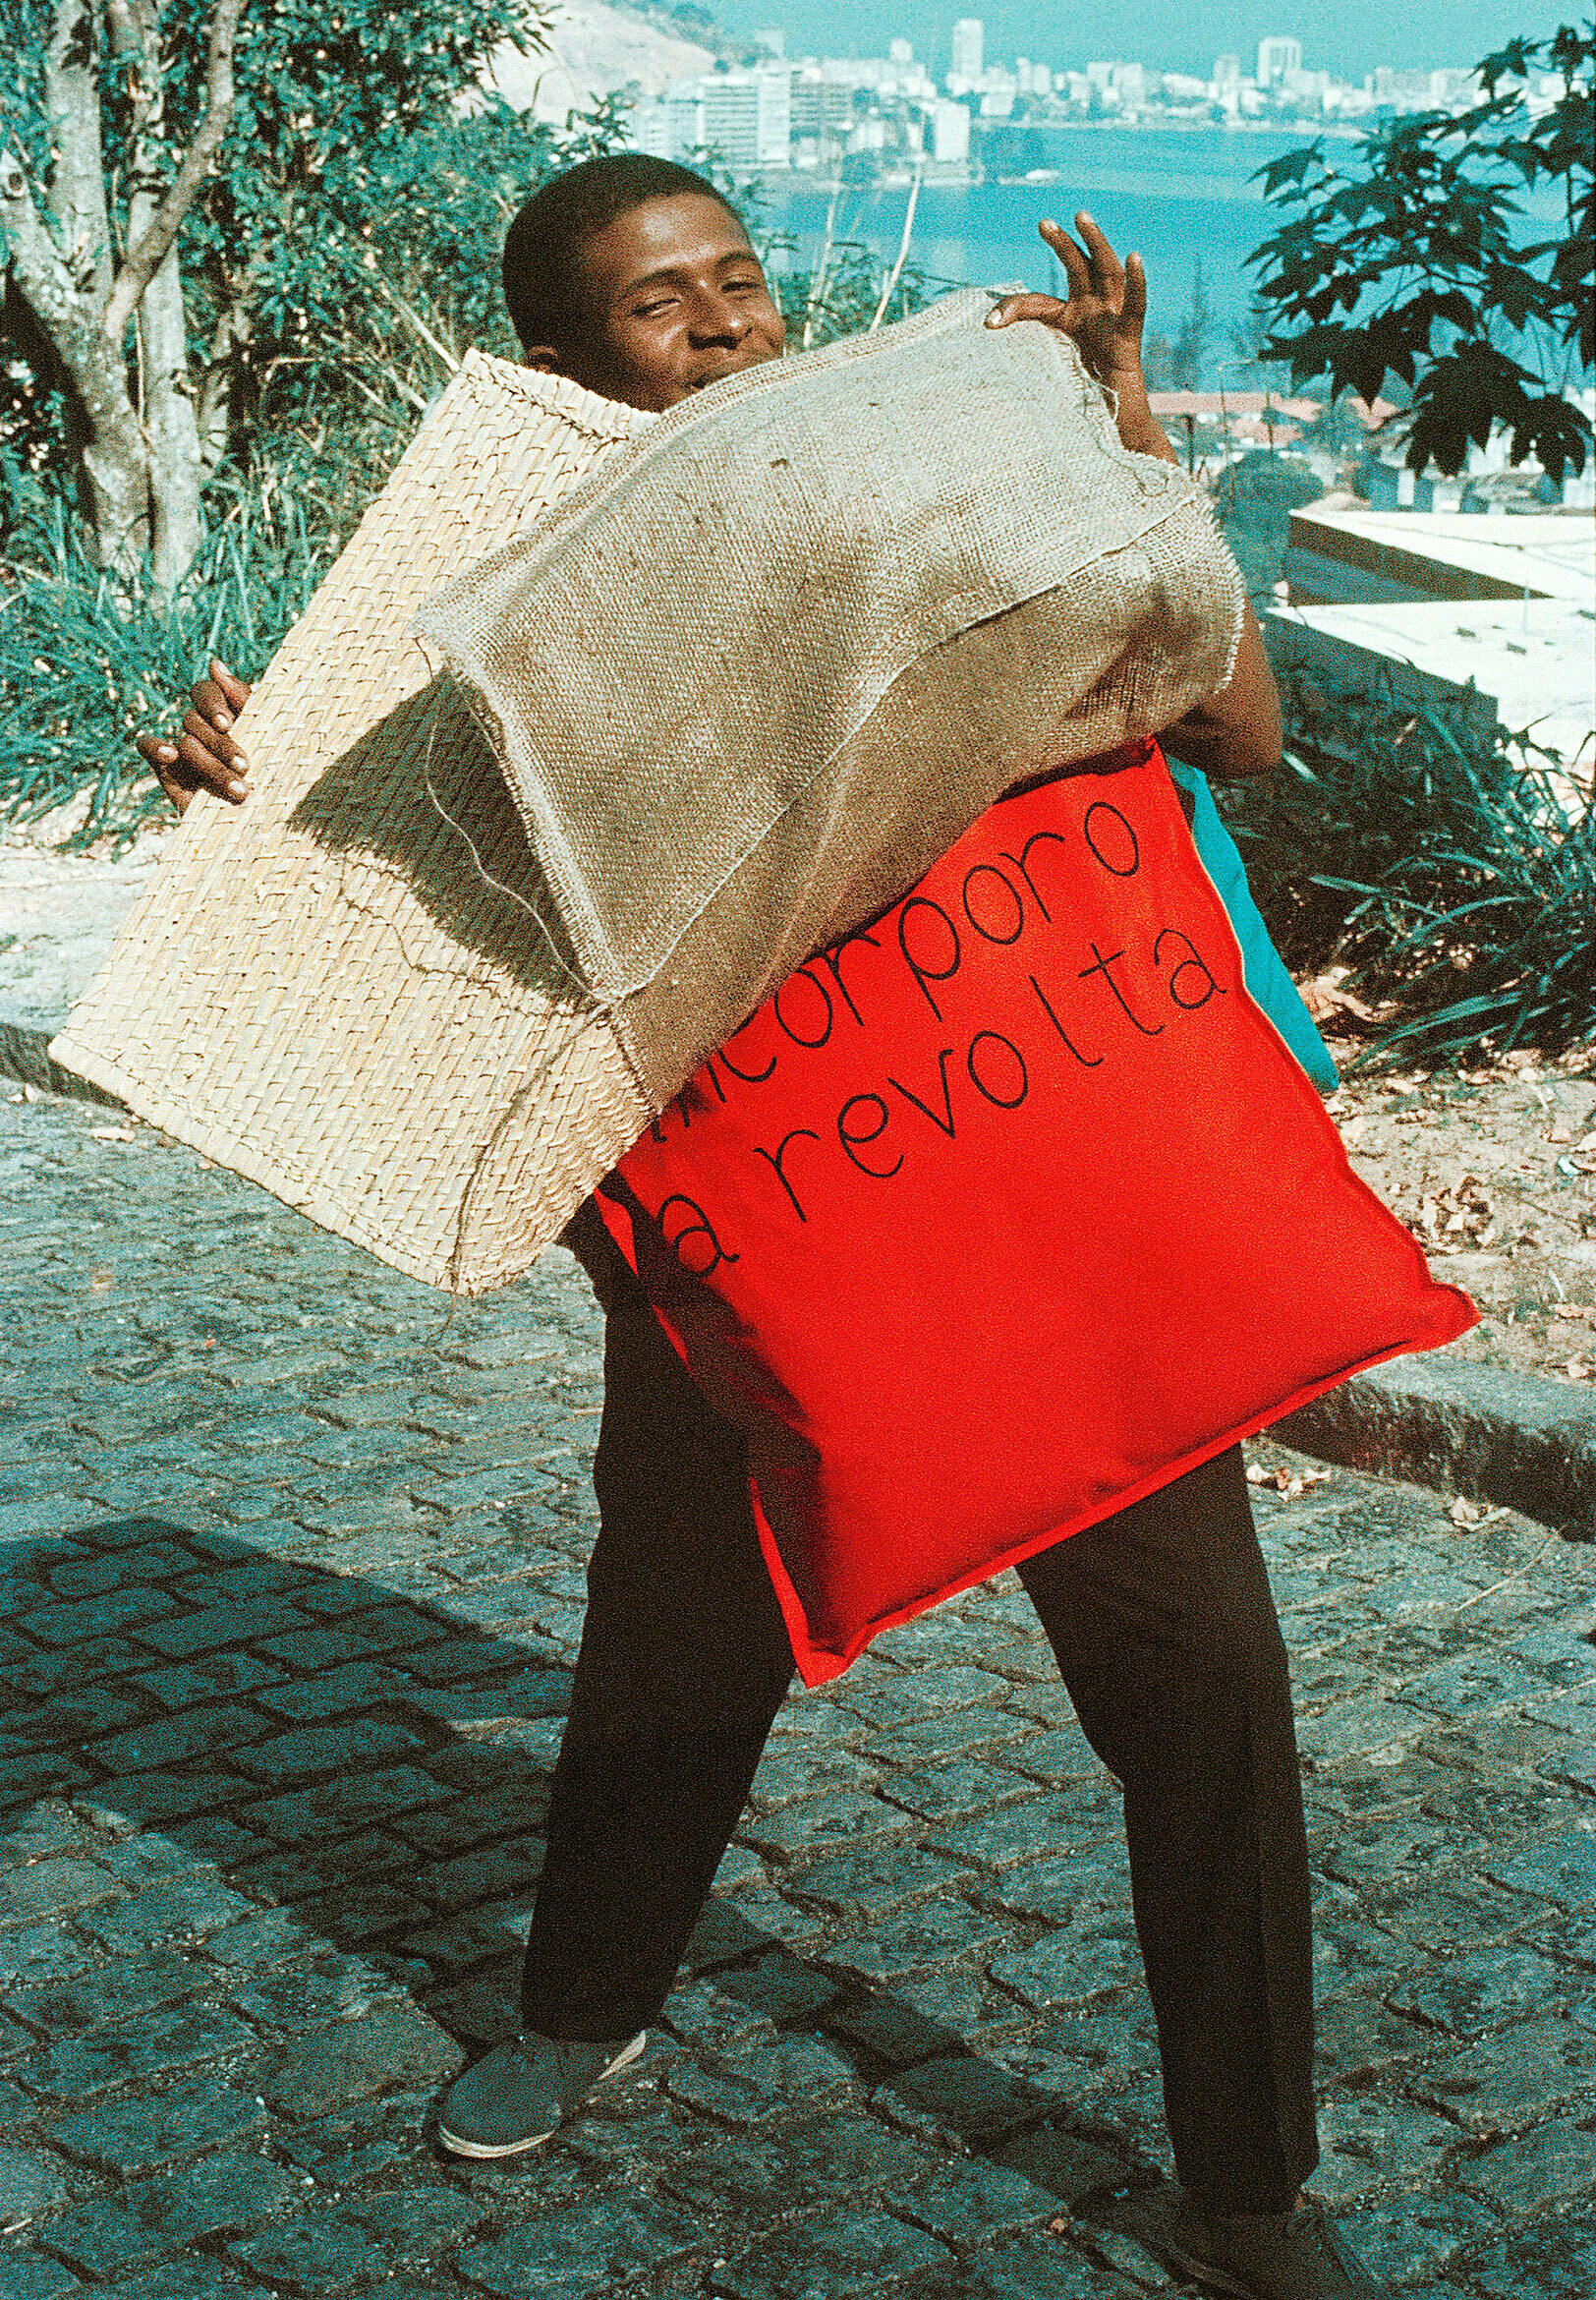 Image of man standing in street on hill overlooking body of water and holding burlap and pillows that say incorporo a revolta